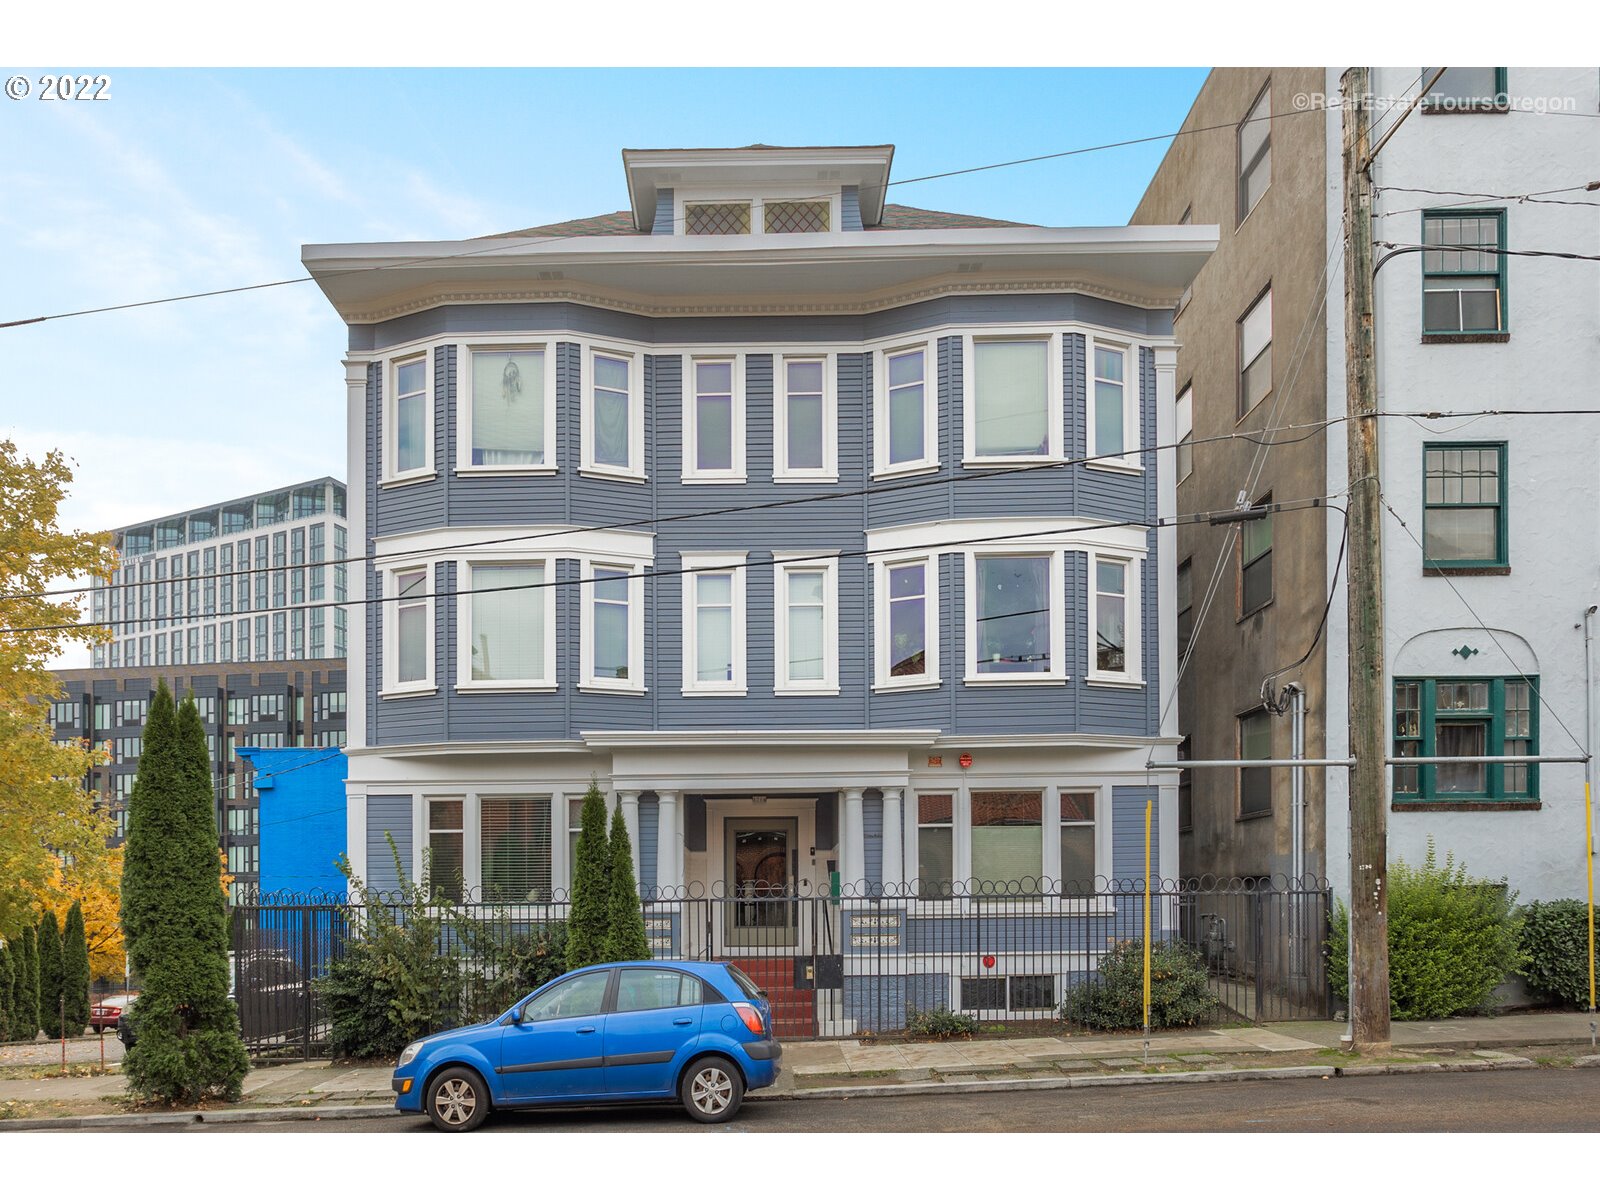 1714 NW COUCH ST 11, Portland, OR 97209